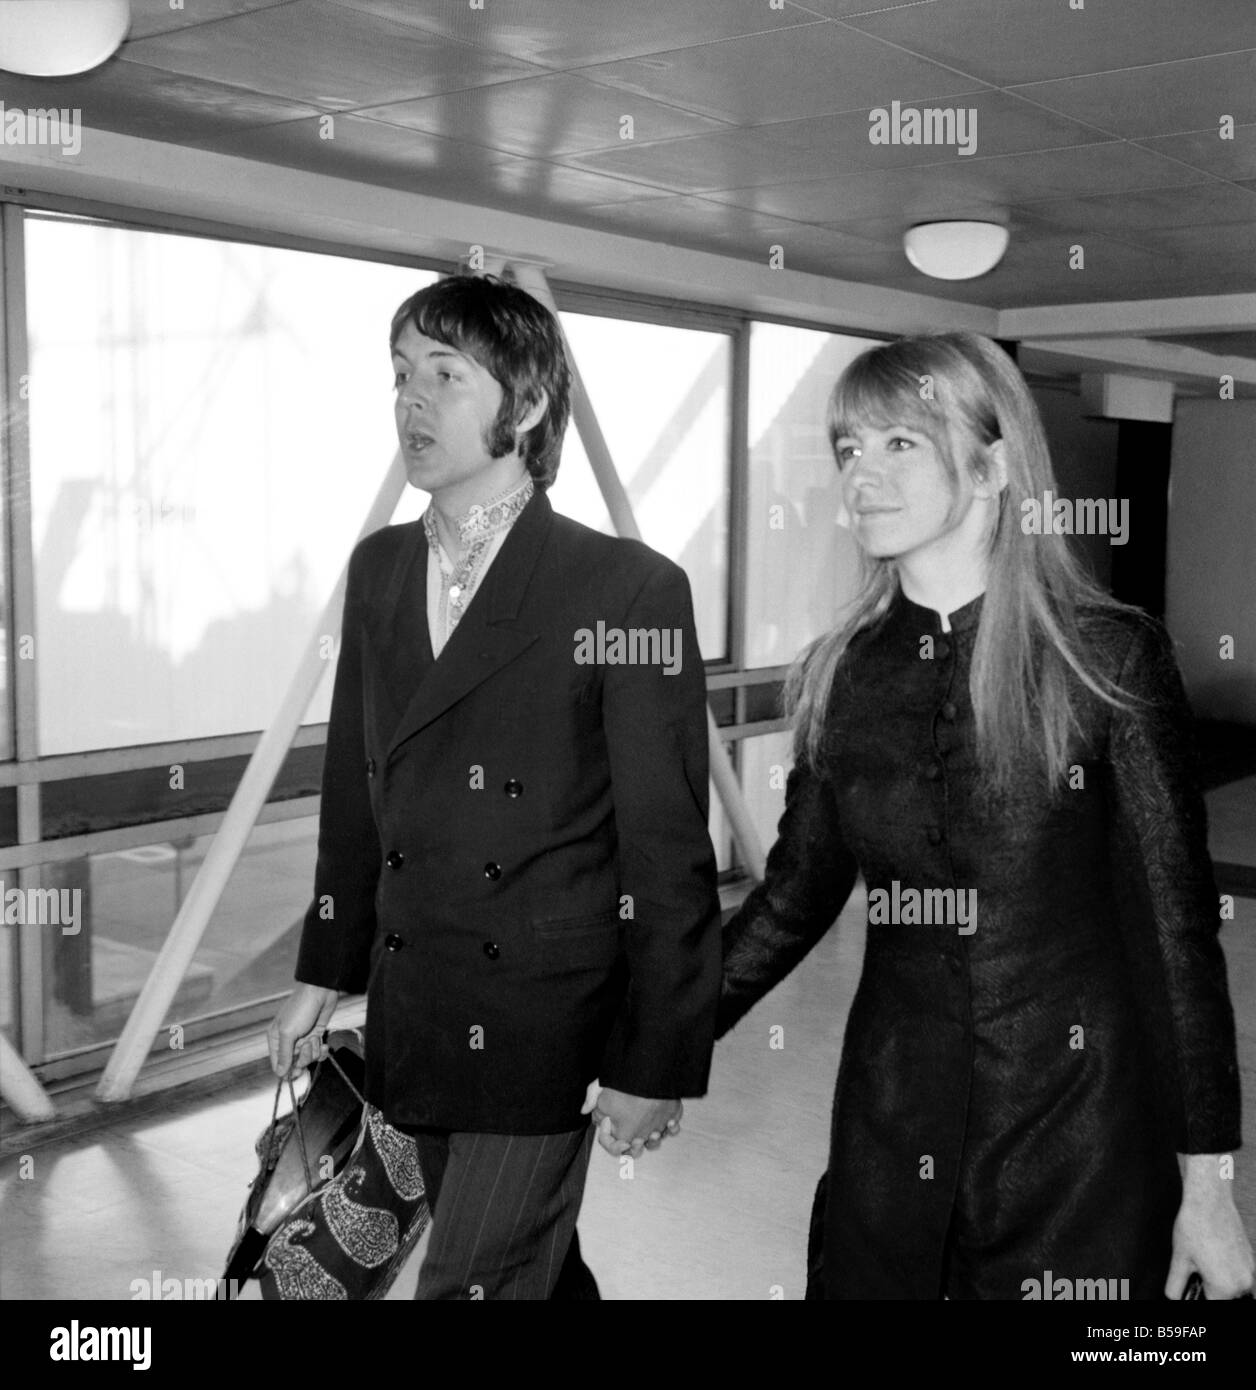 Paul McCartney of the Beatles and Jane Asher at Heathrow today. March ...